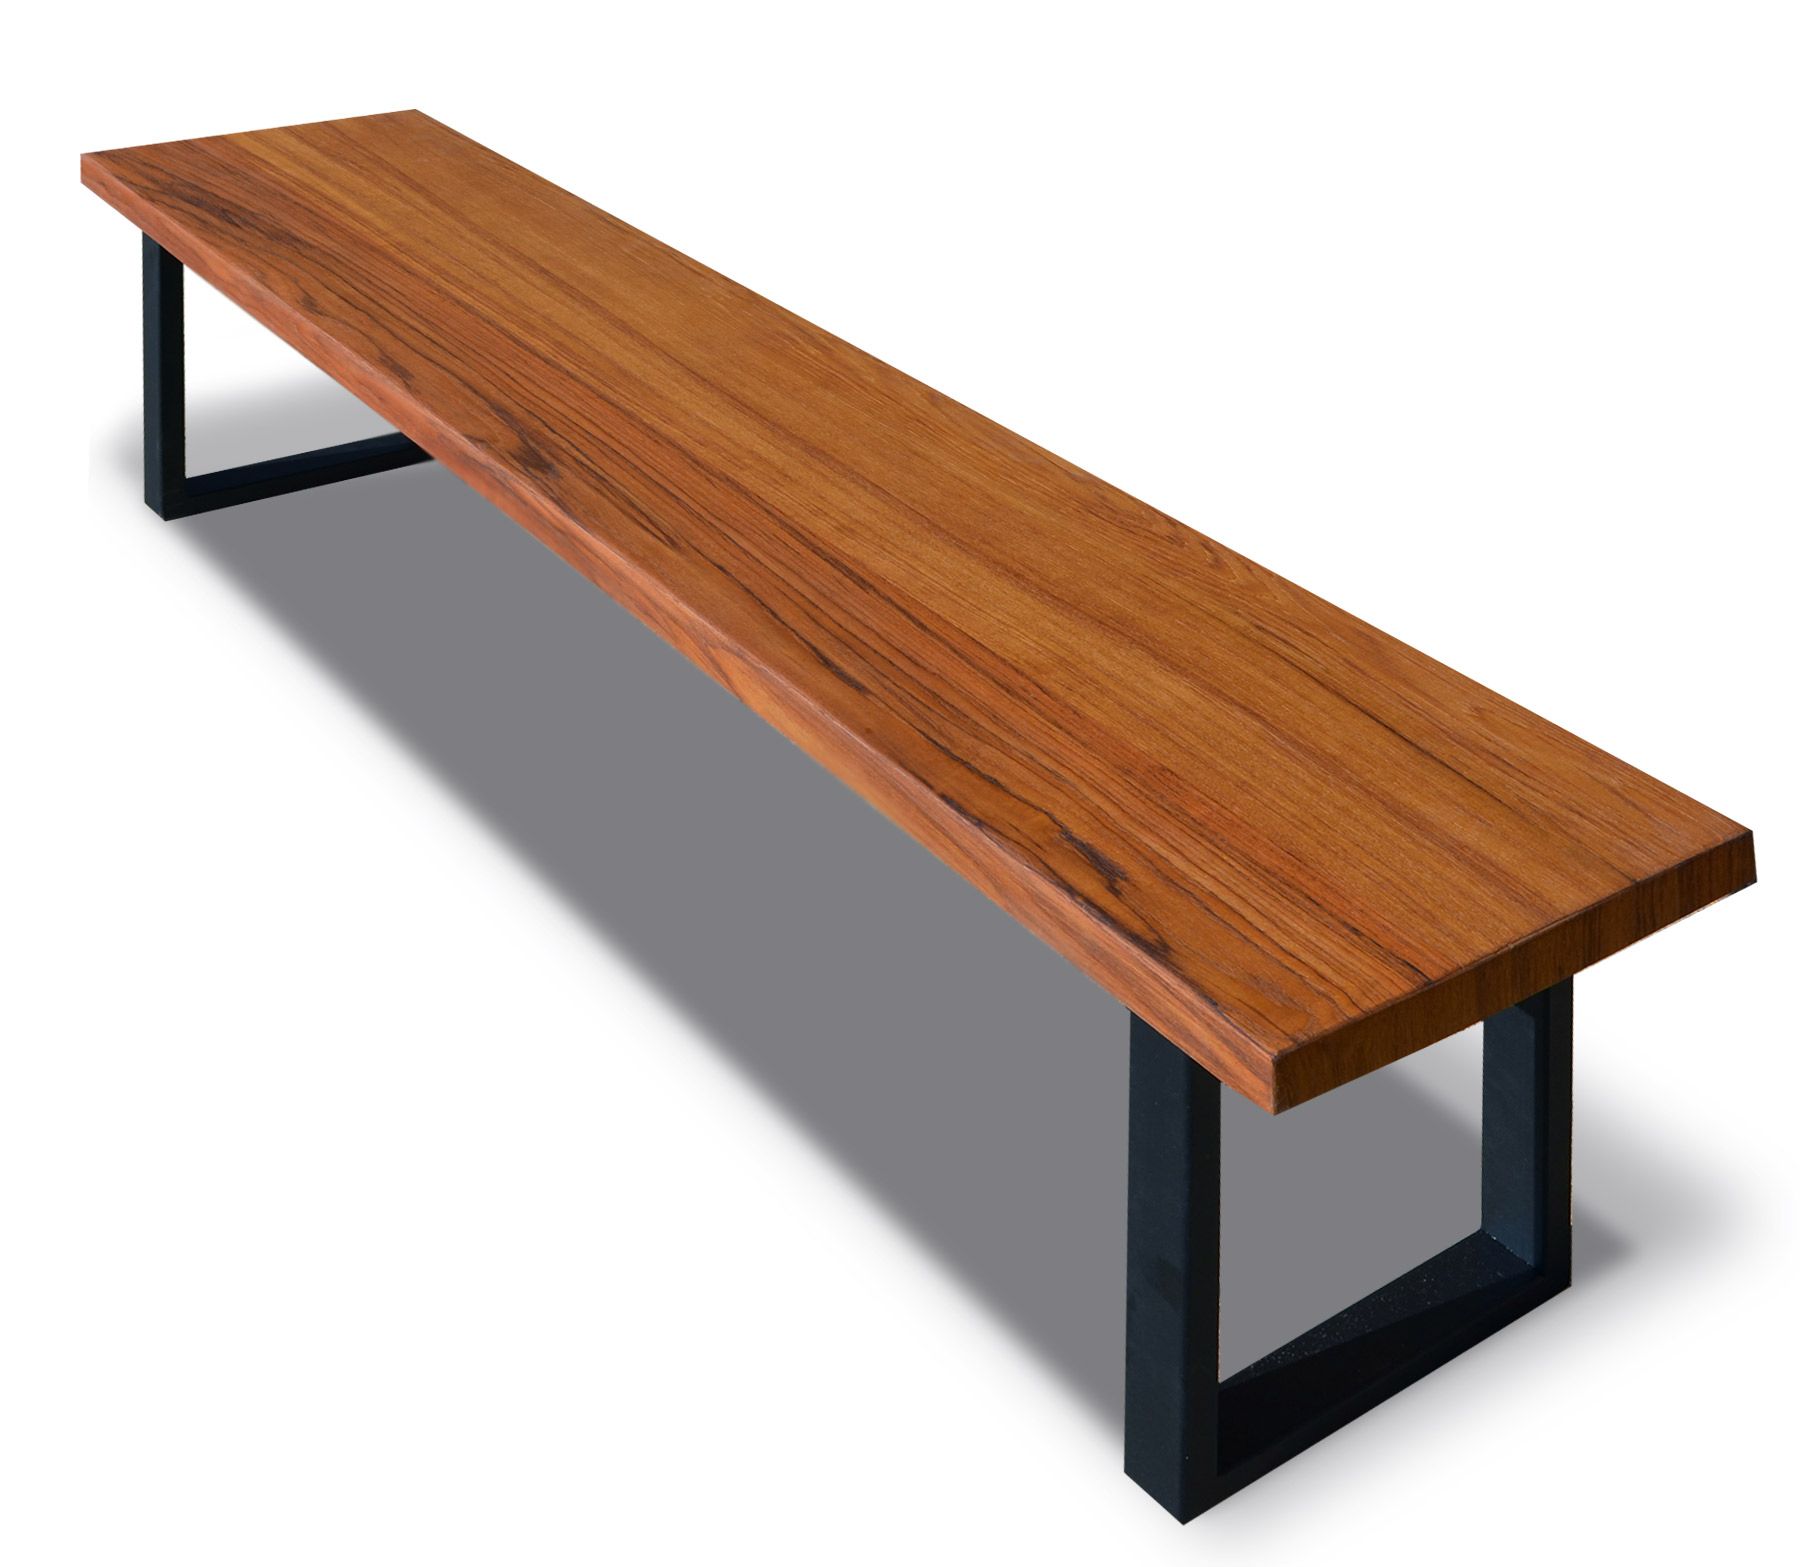 Hand Crafted Modern Teak Bench With Metal Legs by Abodeacious